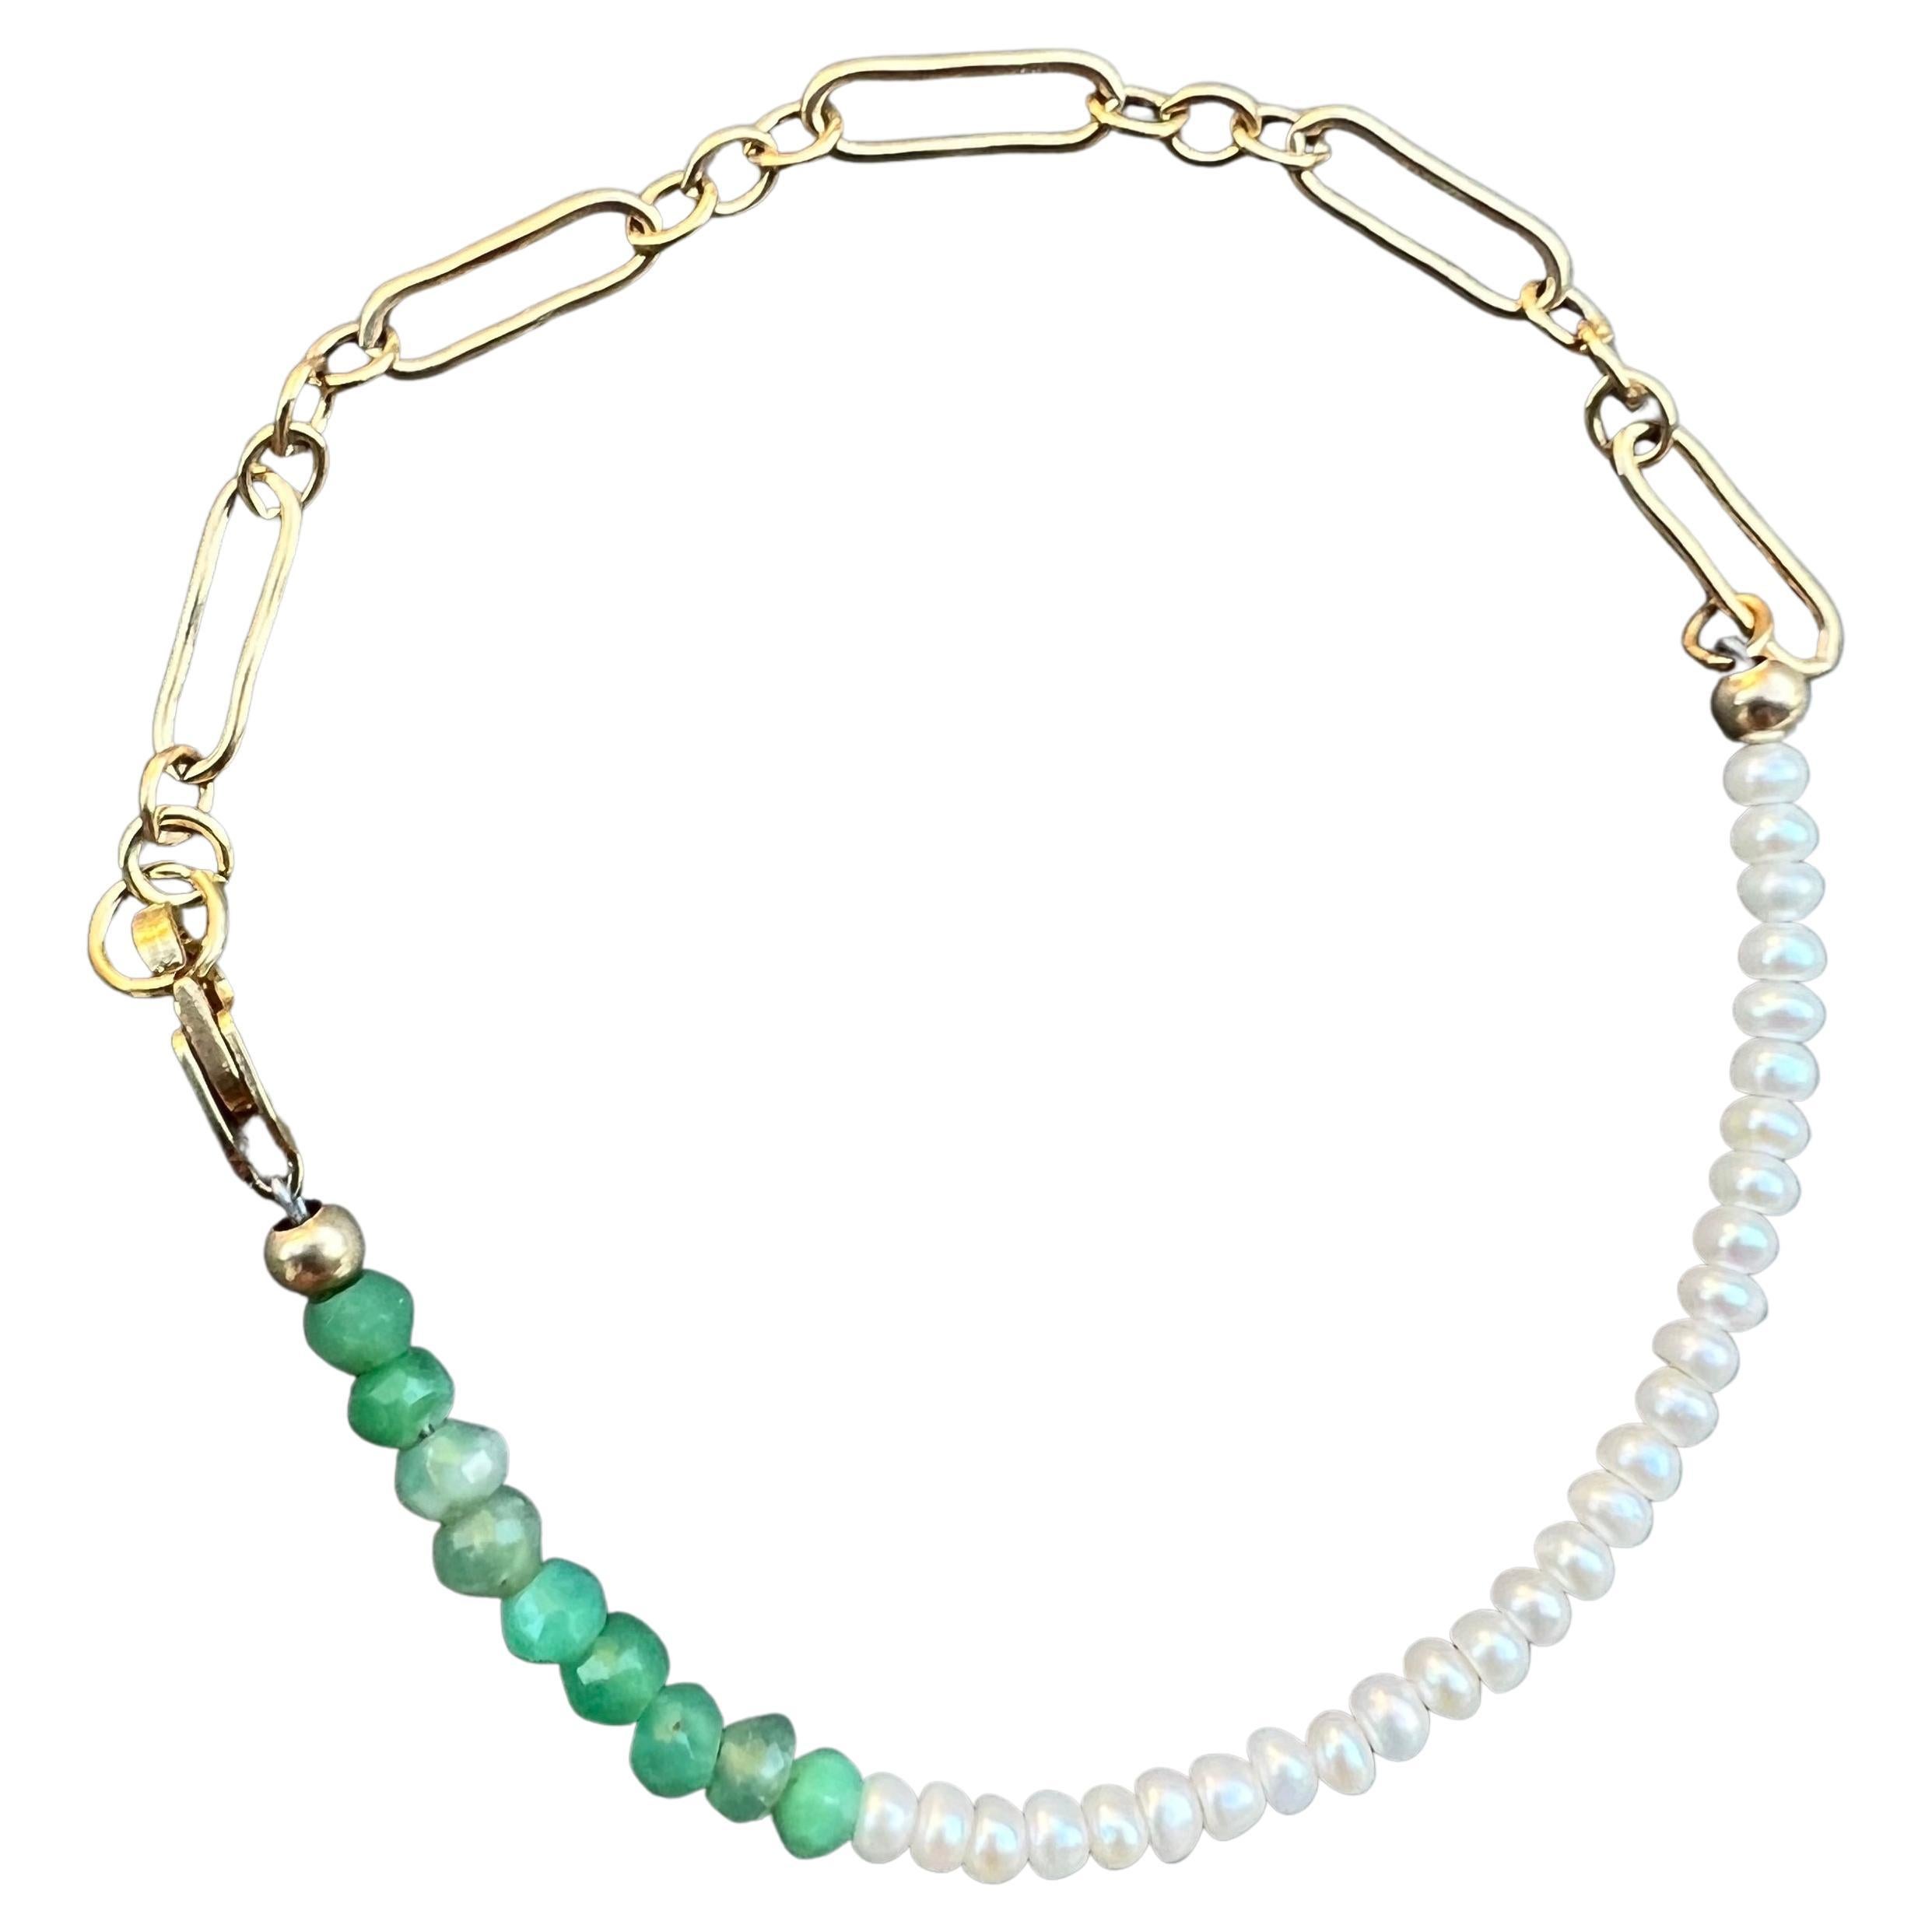 White Pearl Chain Bracelet Green Chrysoprase Gold Filled J Dauphin For Sale